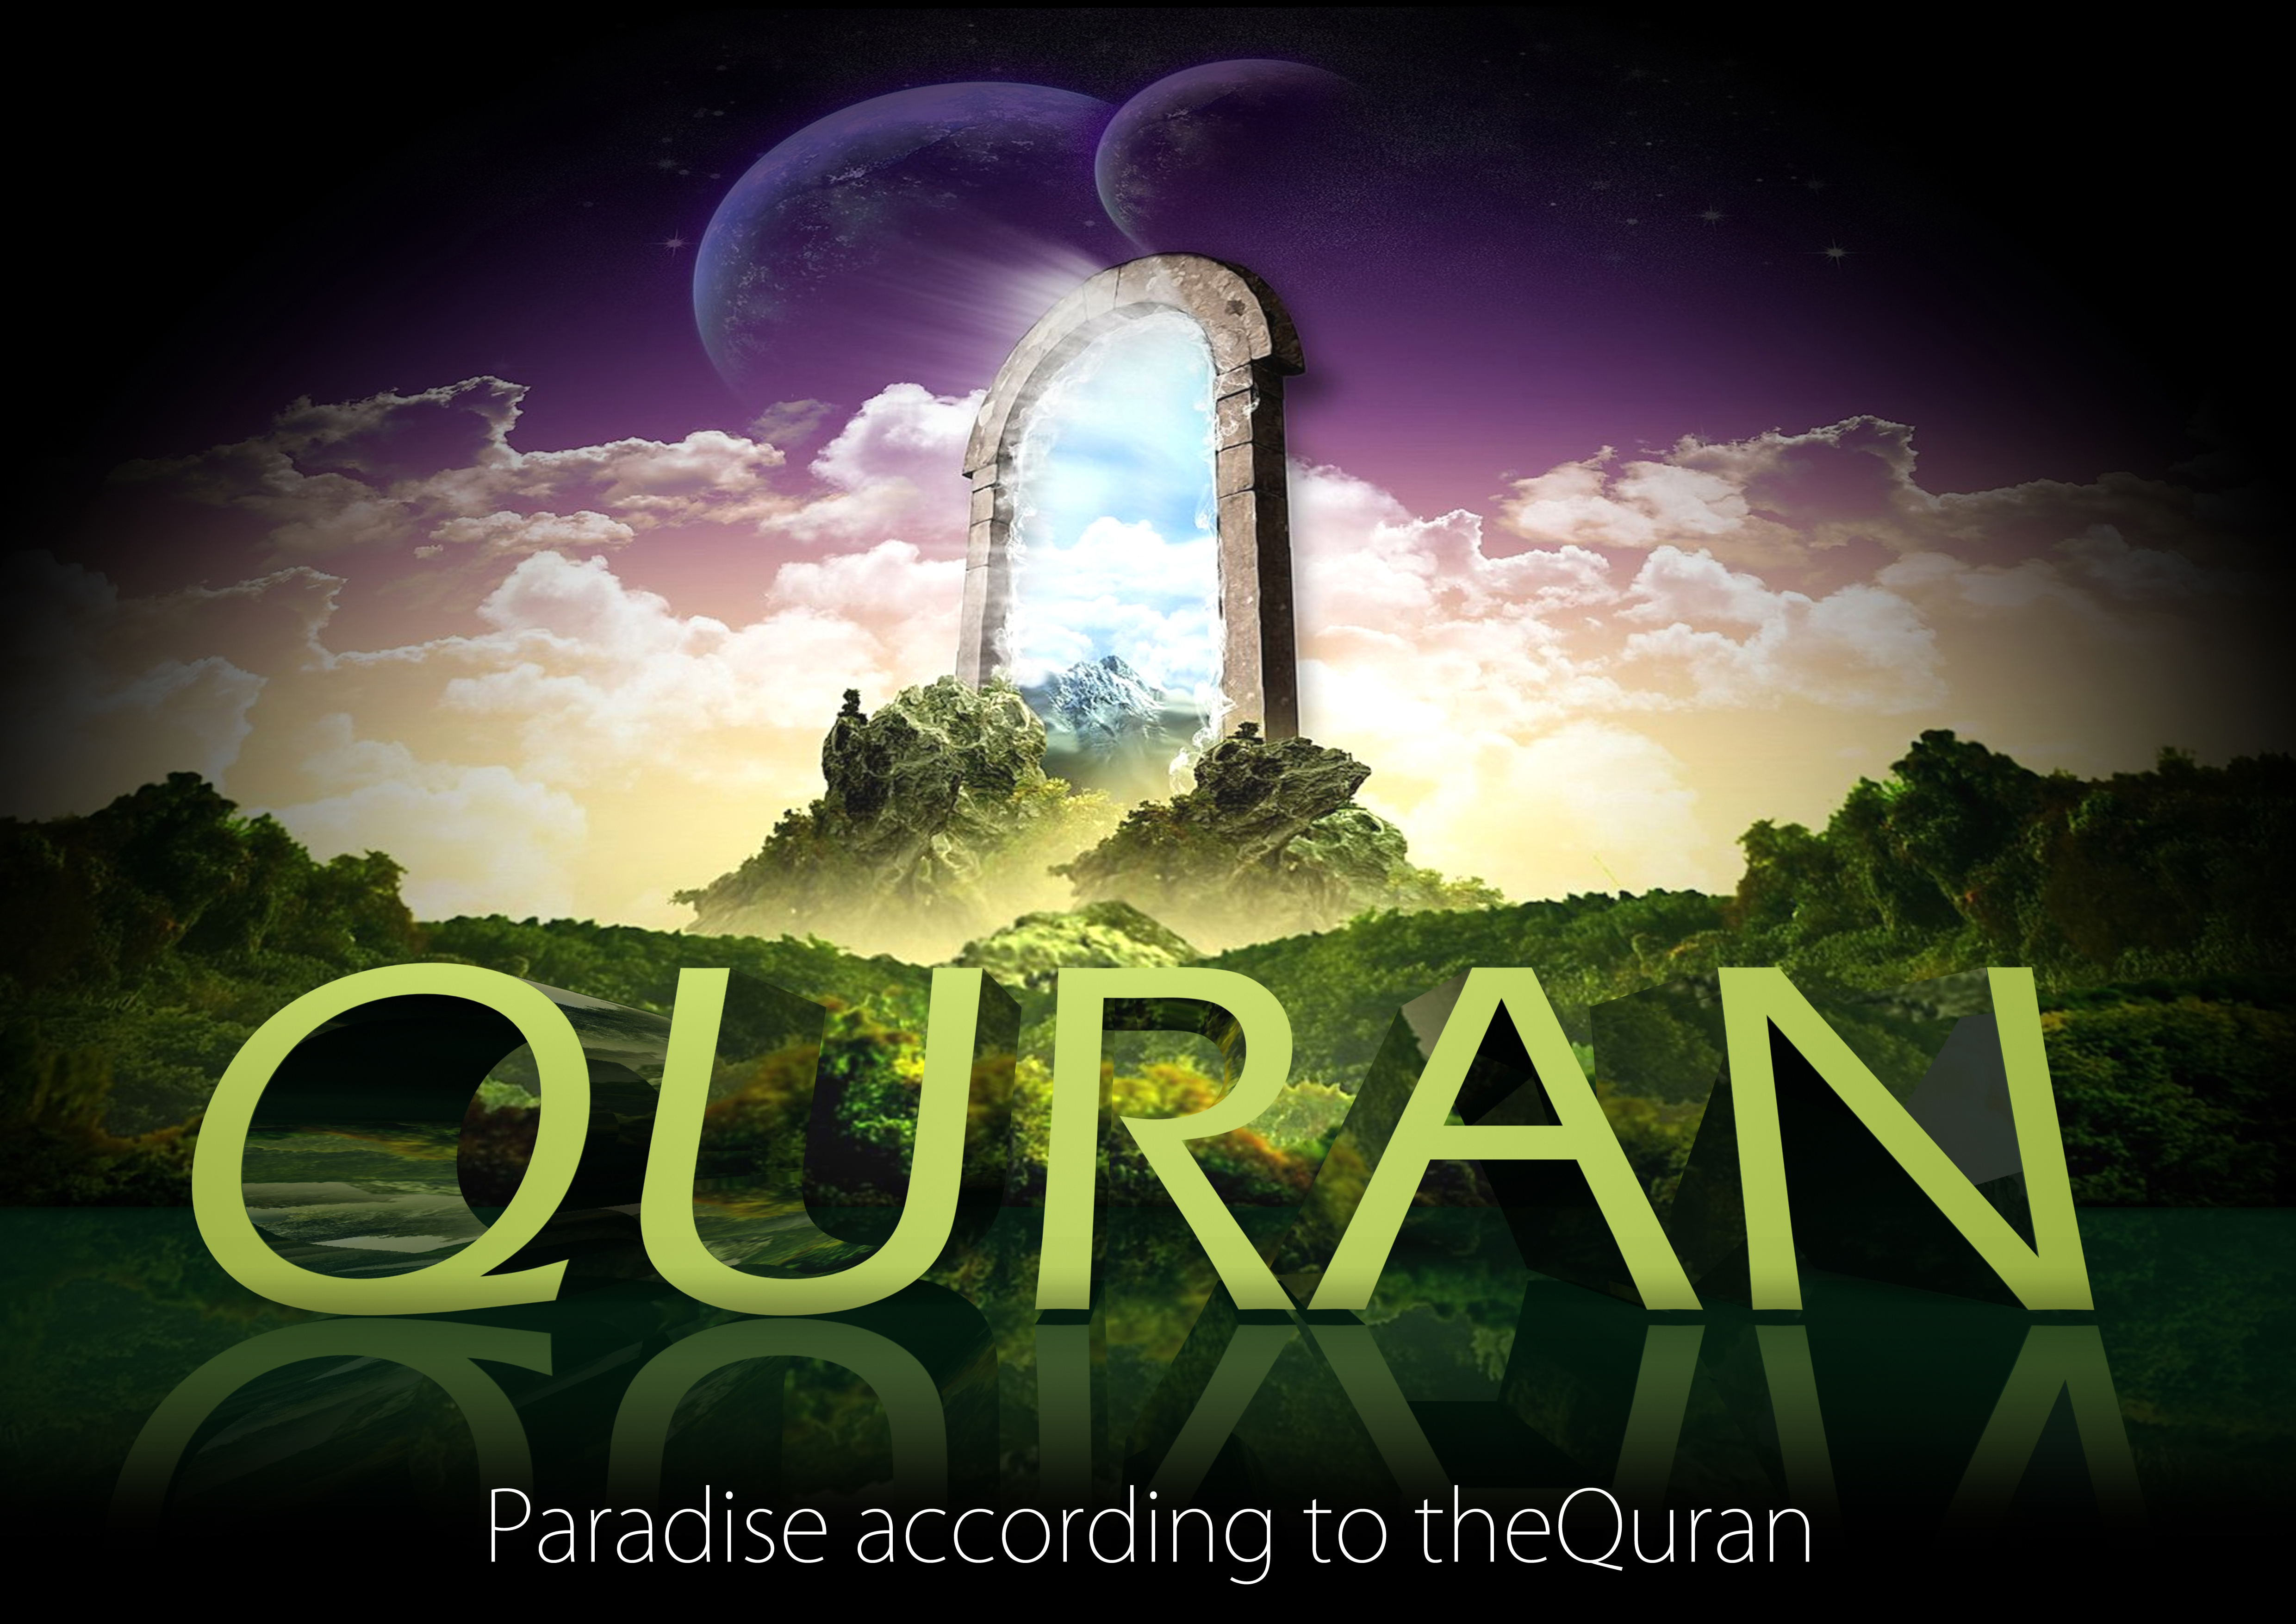 Paradise according to the Quran